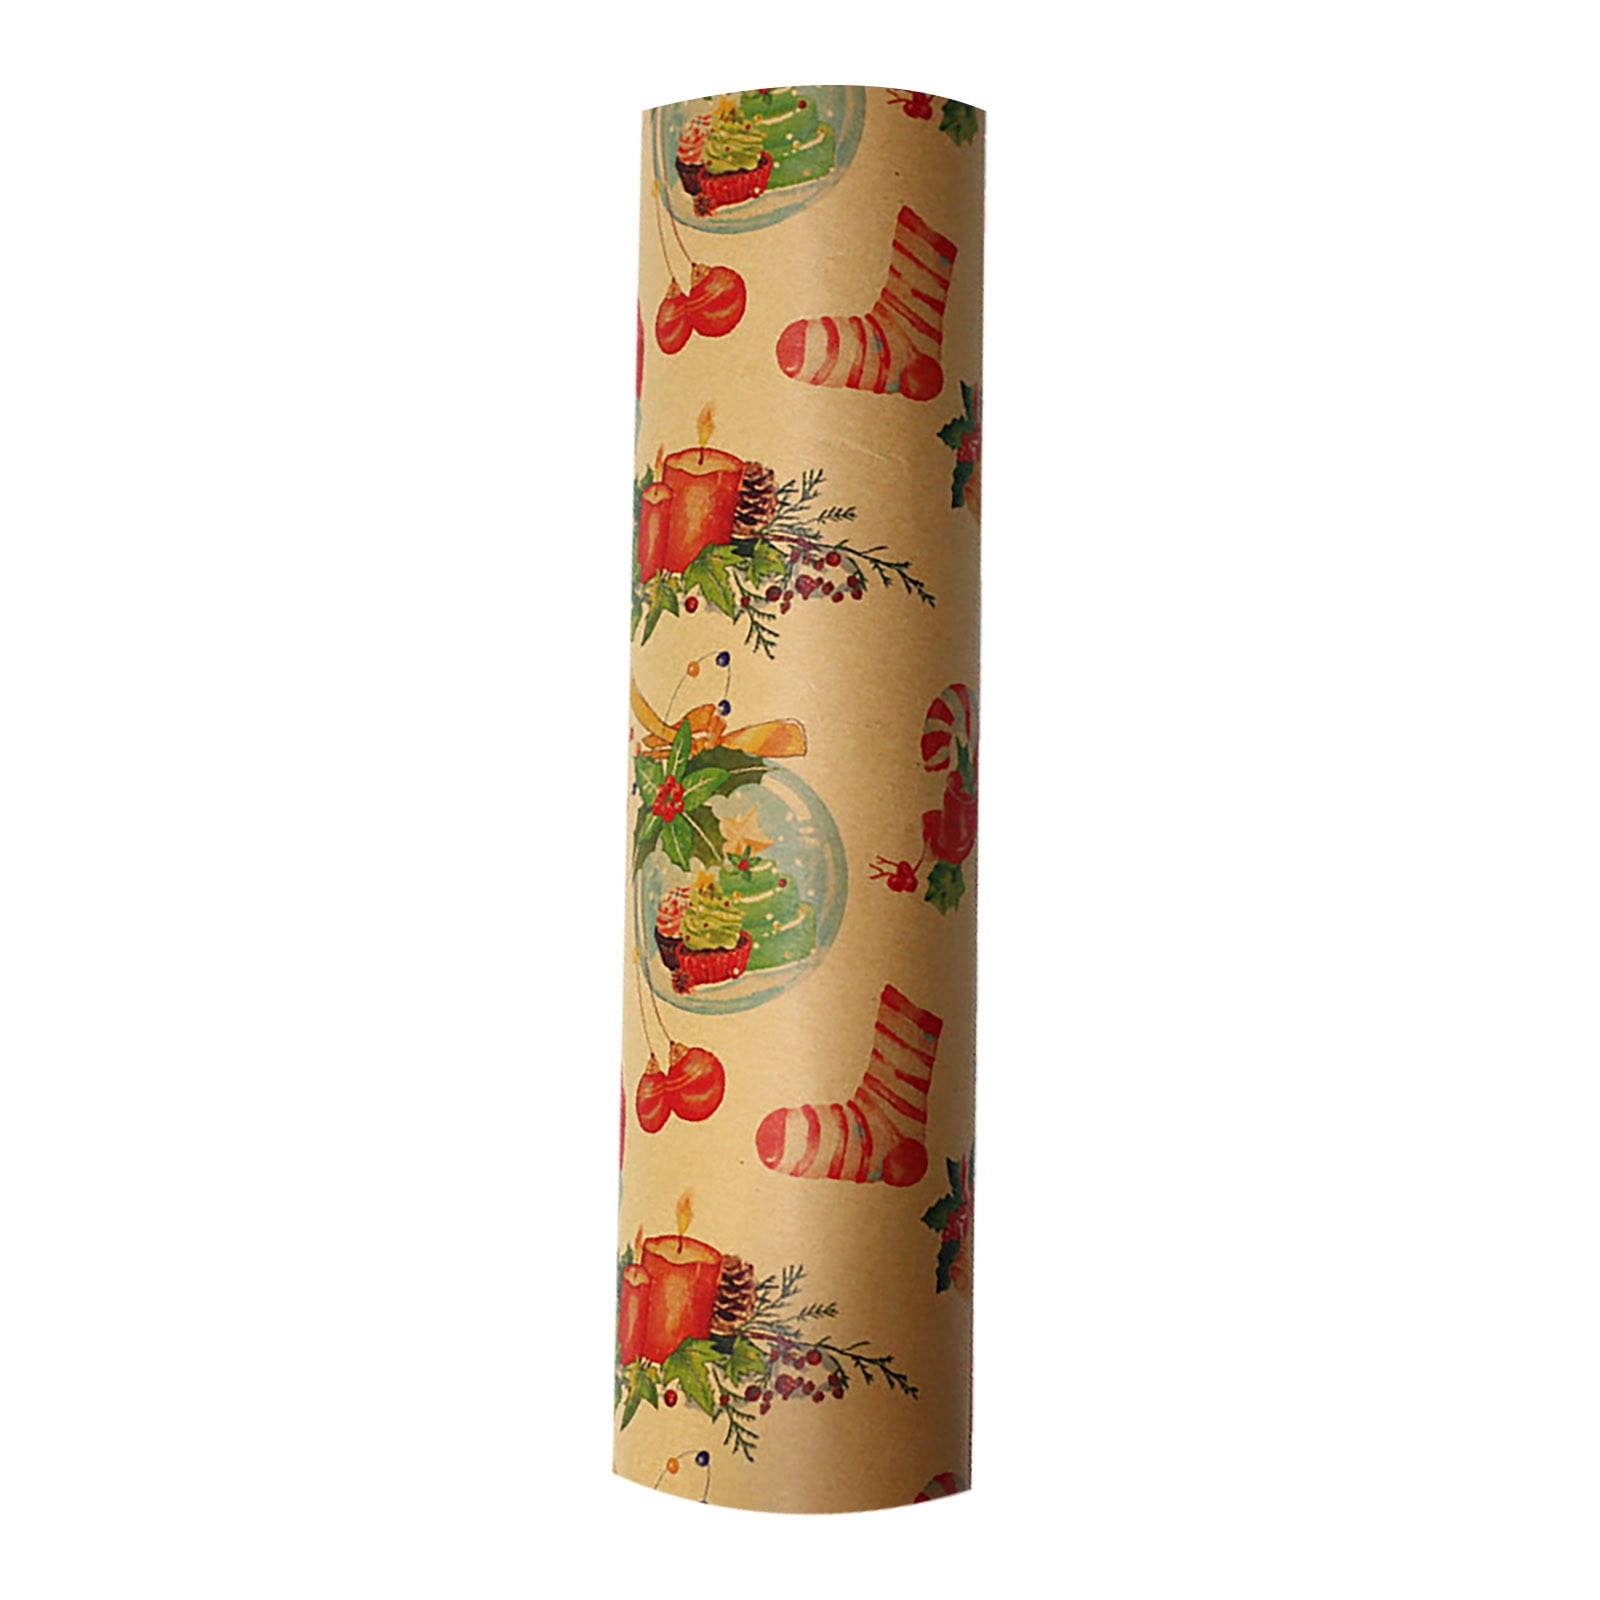 Christmas Wrapping Paper Clearance  Christmas Wrapping Paper Wholesale -  52x75cm - Aliexpress